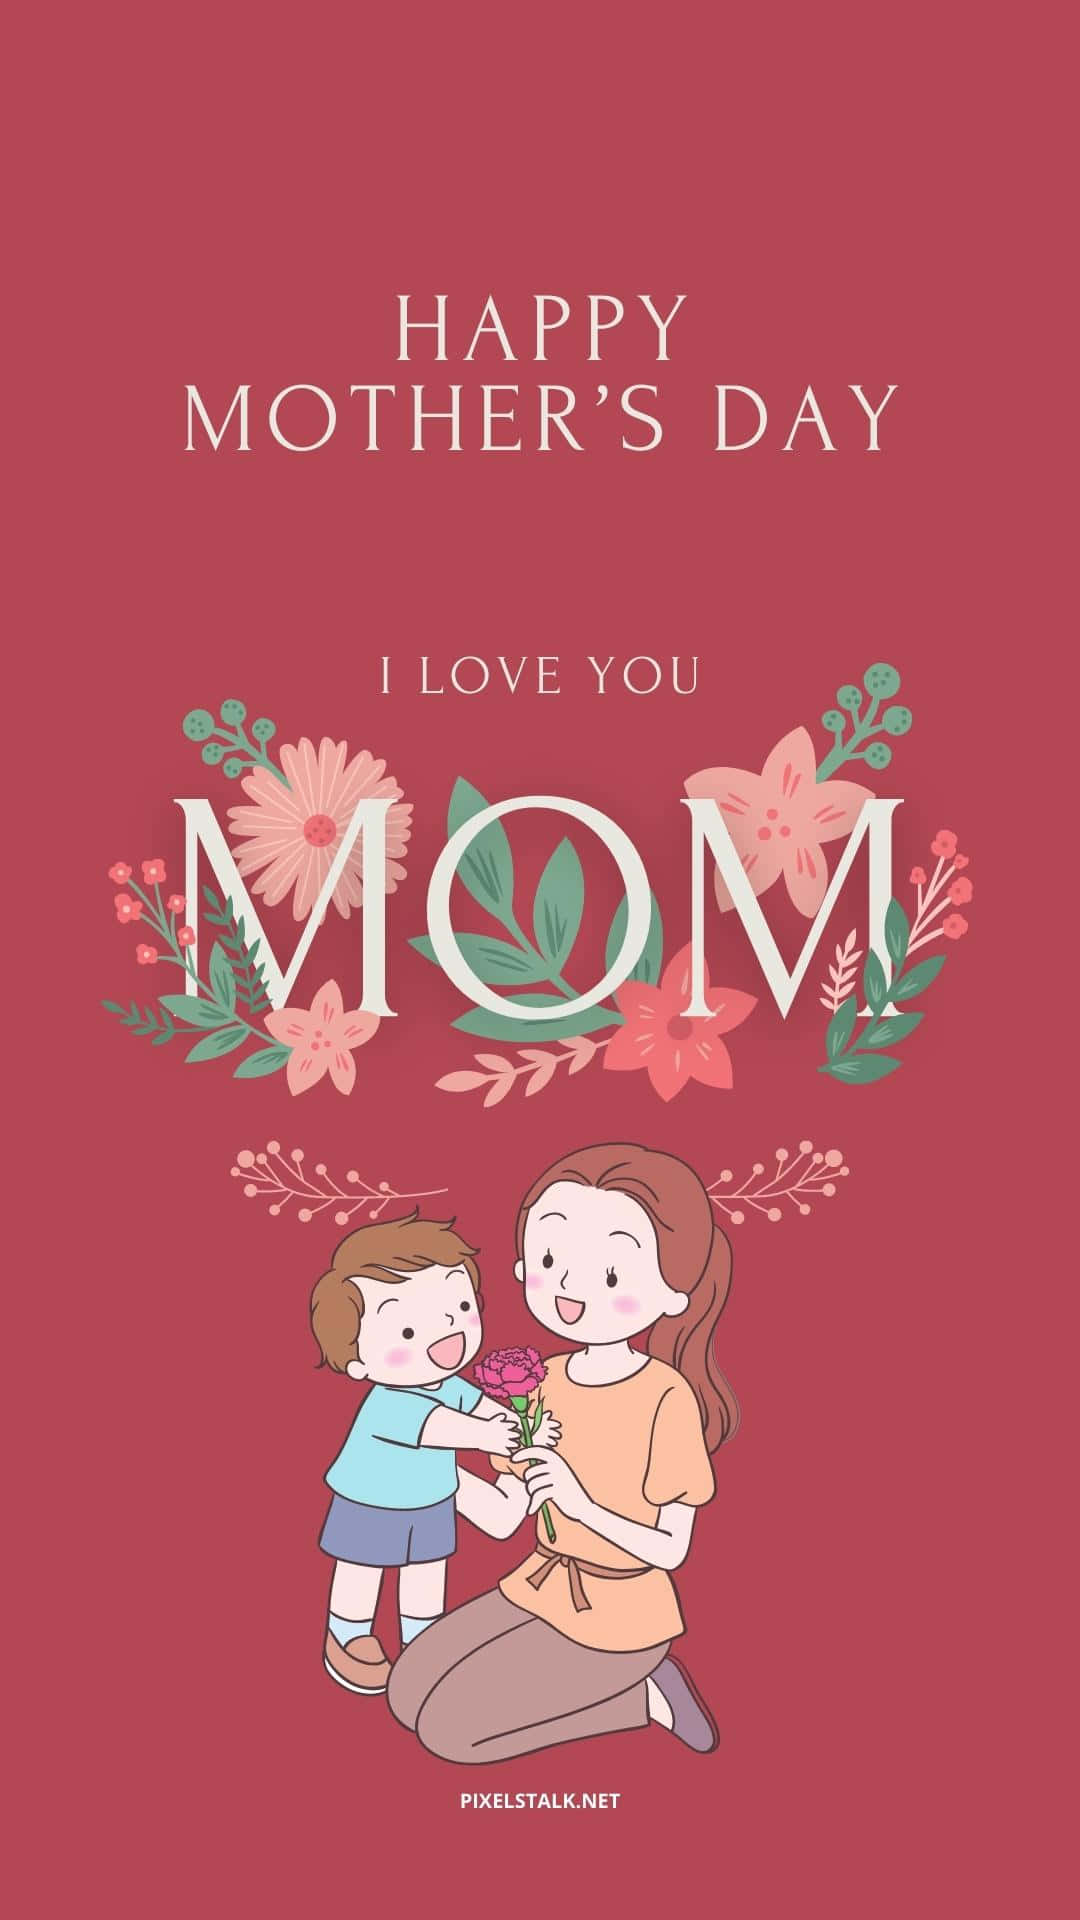 Happy Mother's Day 2023 Images & HD Wallpapers for Free Download Online:  WhatsApp Messages, Quotes and Greetings To Celebrate This Special Day  Dedicated to Moms!